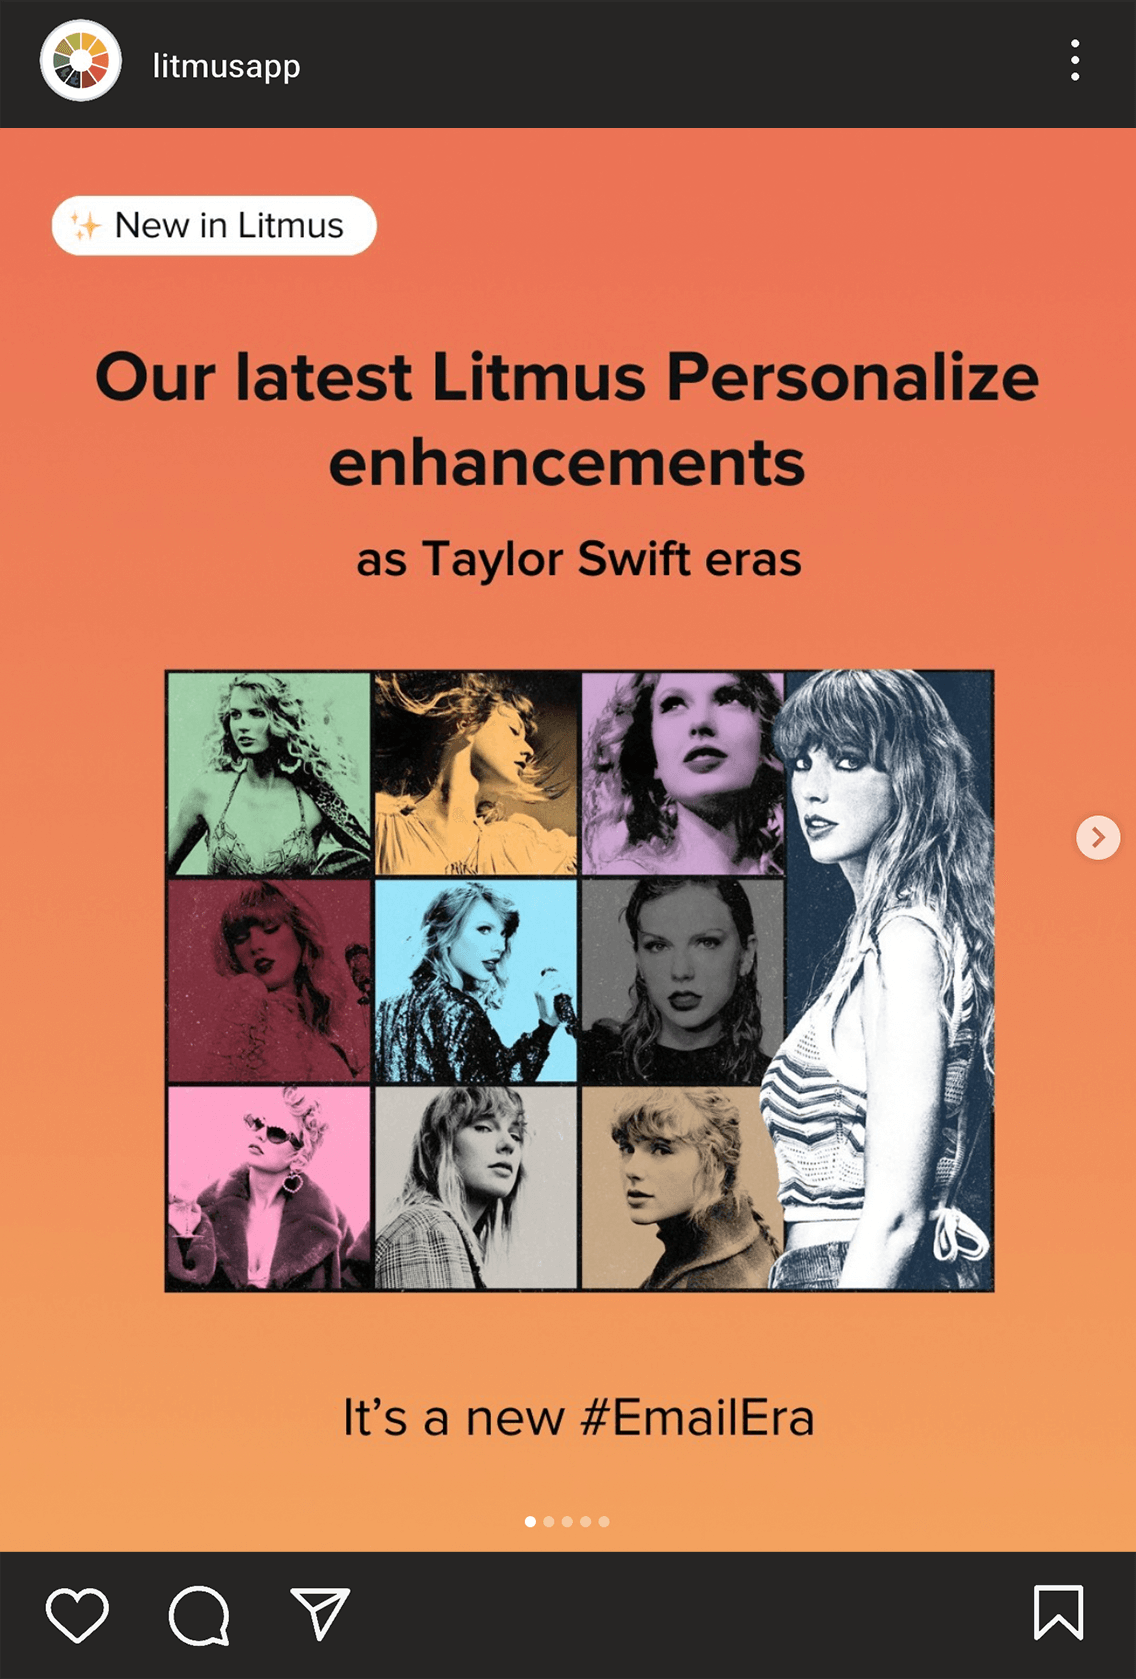 @litmusapp on Instagram's post, which says: 'New in Litmus. Our latest Litmus Personalize elements as Taylor Swift eras. It's a new #EmailEra'